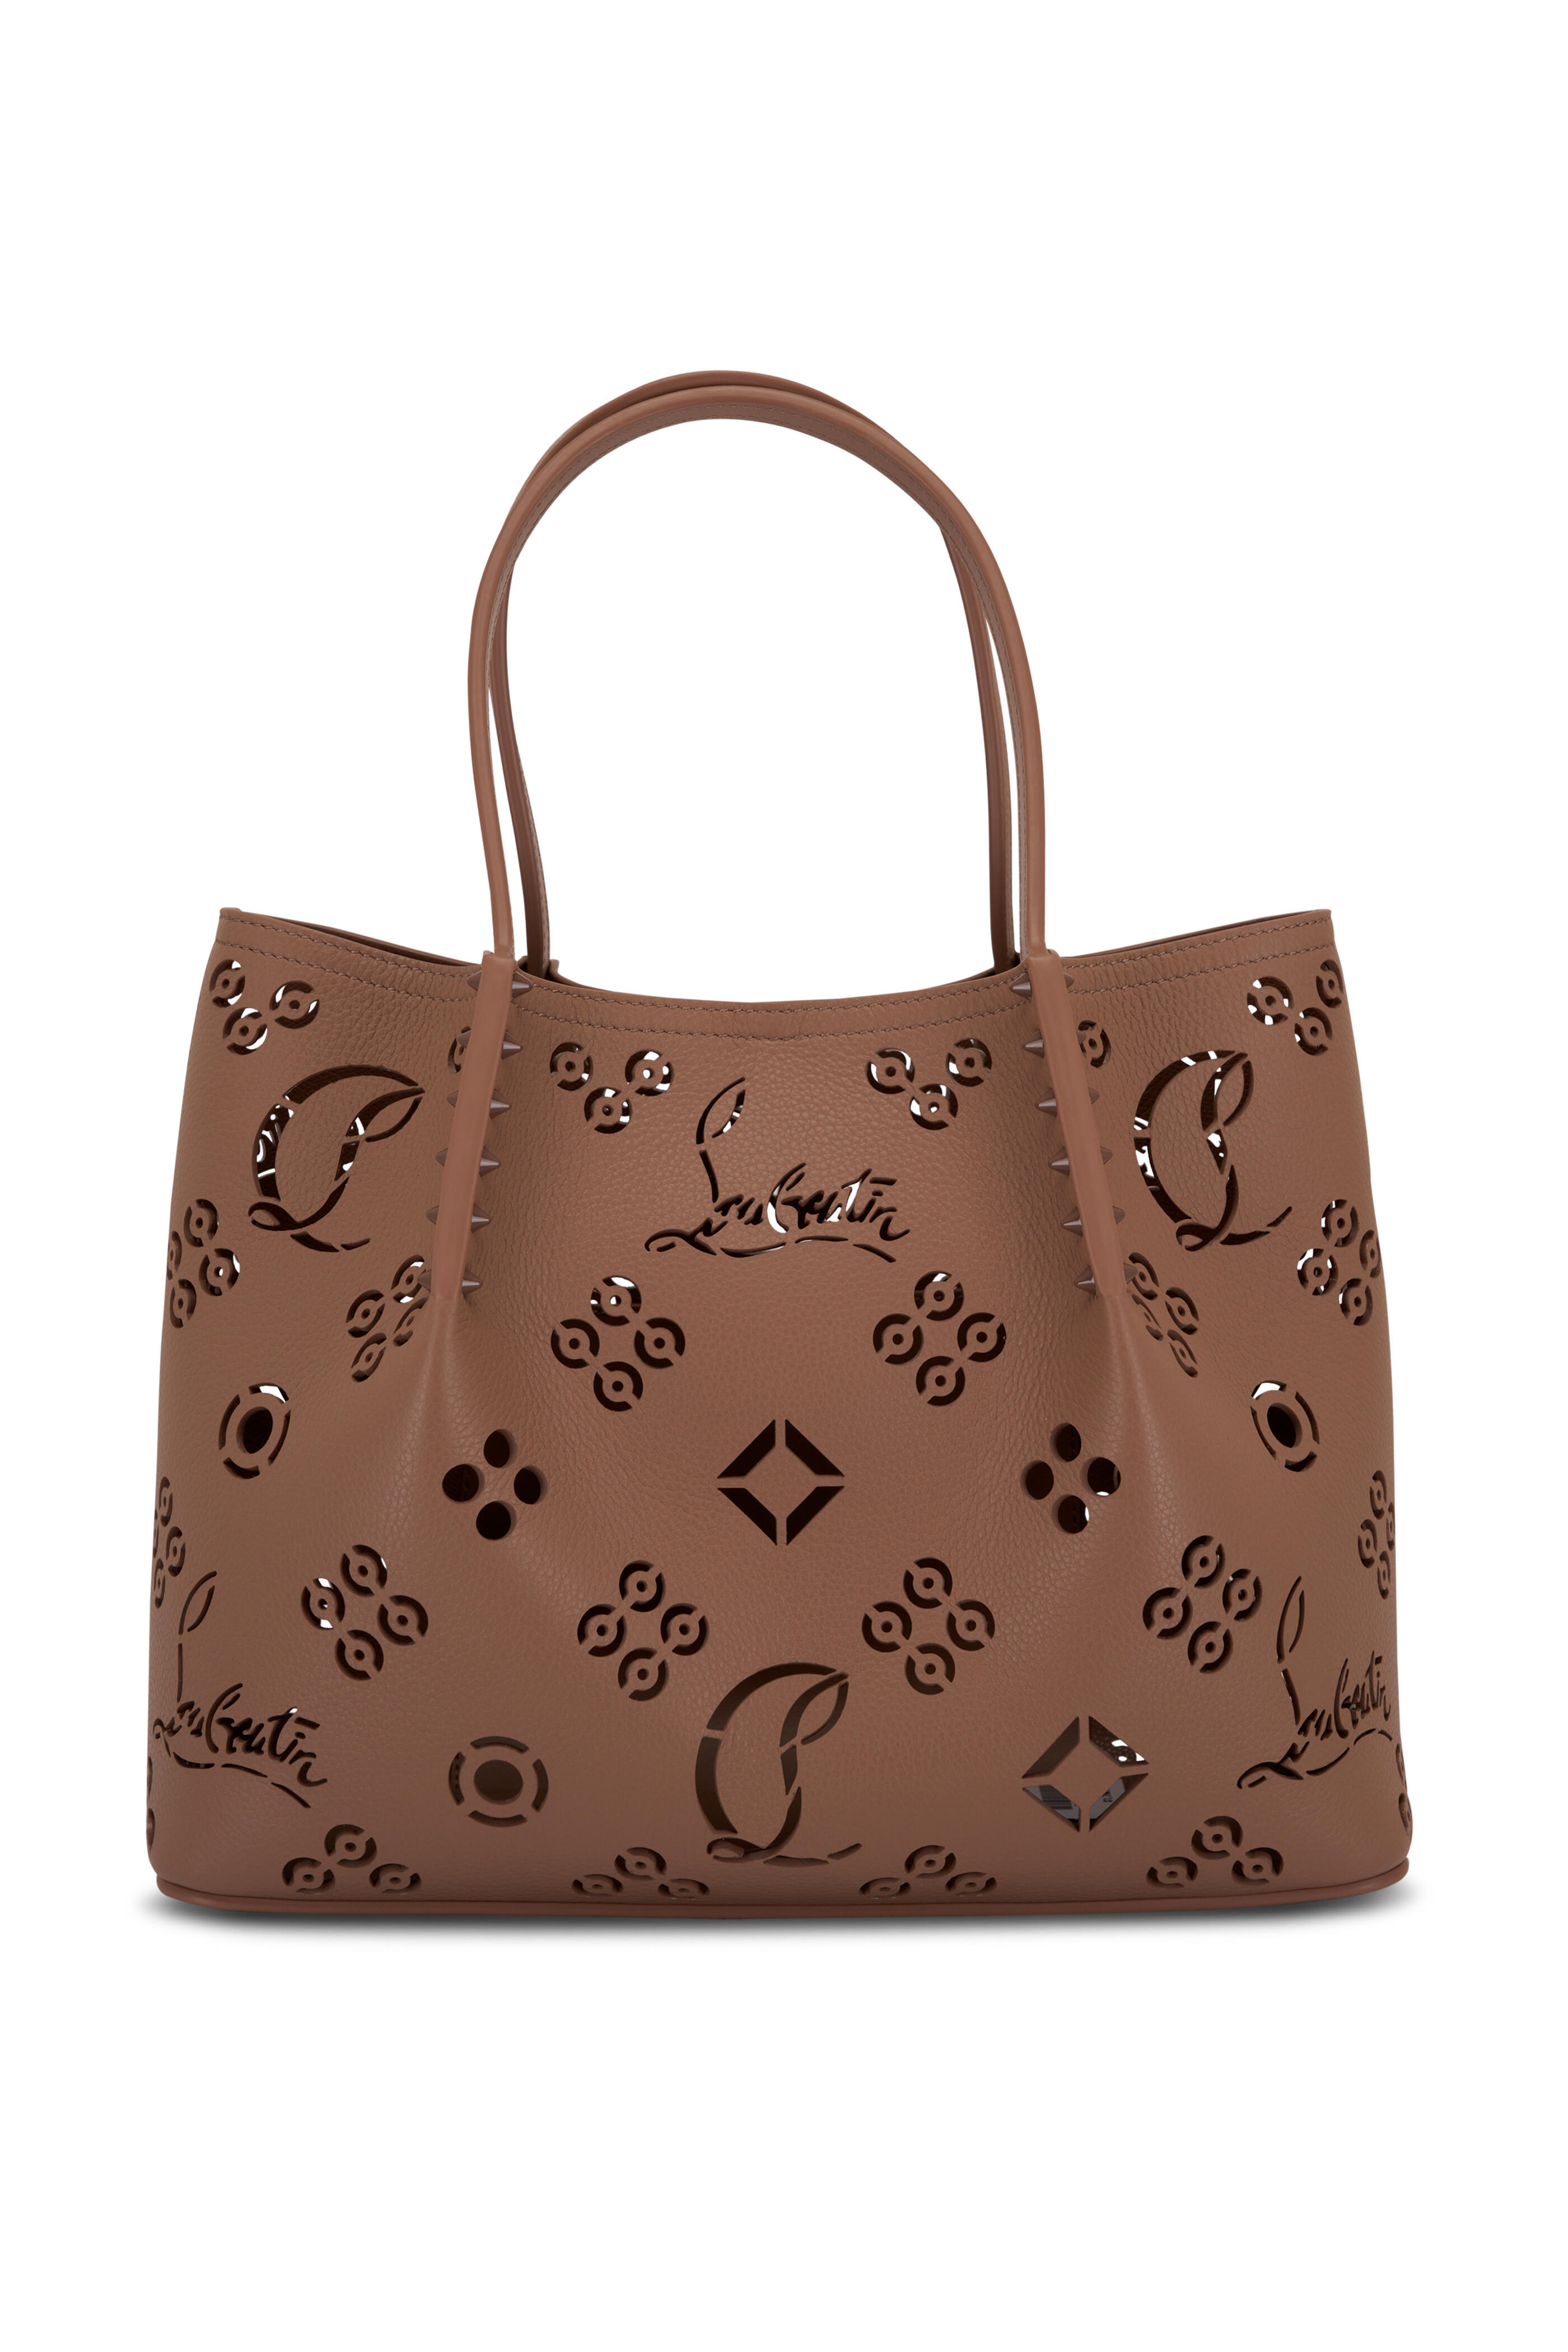 Shopping bag louboutin leather bag Louis Vuitton Brown in Leather